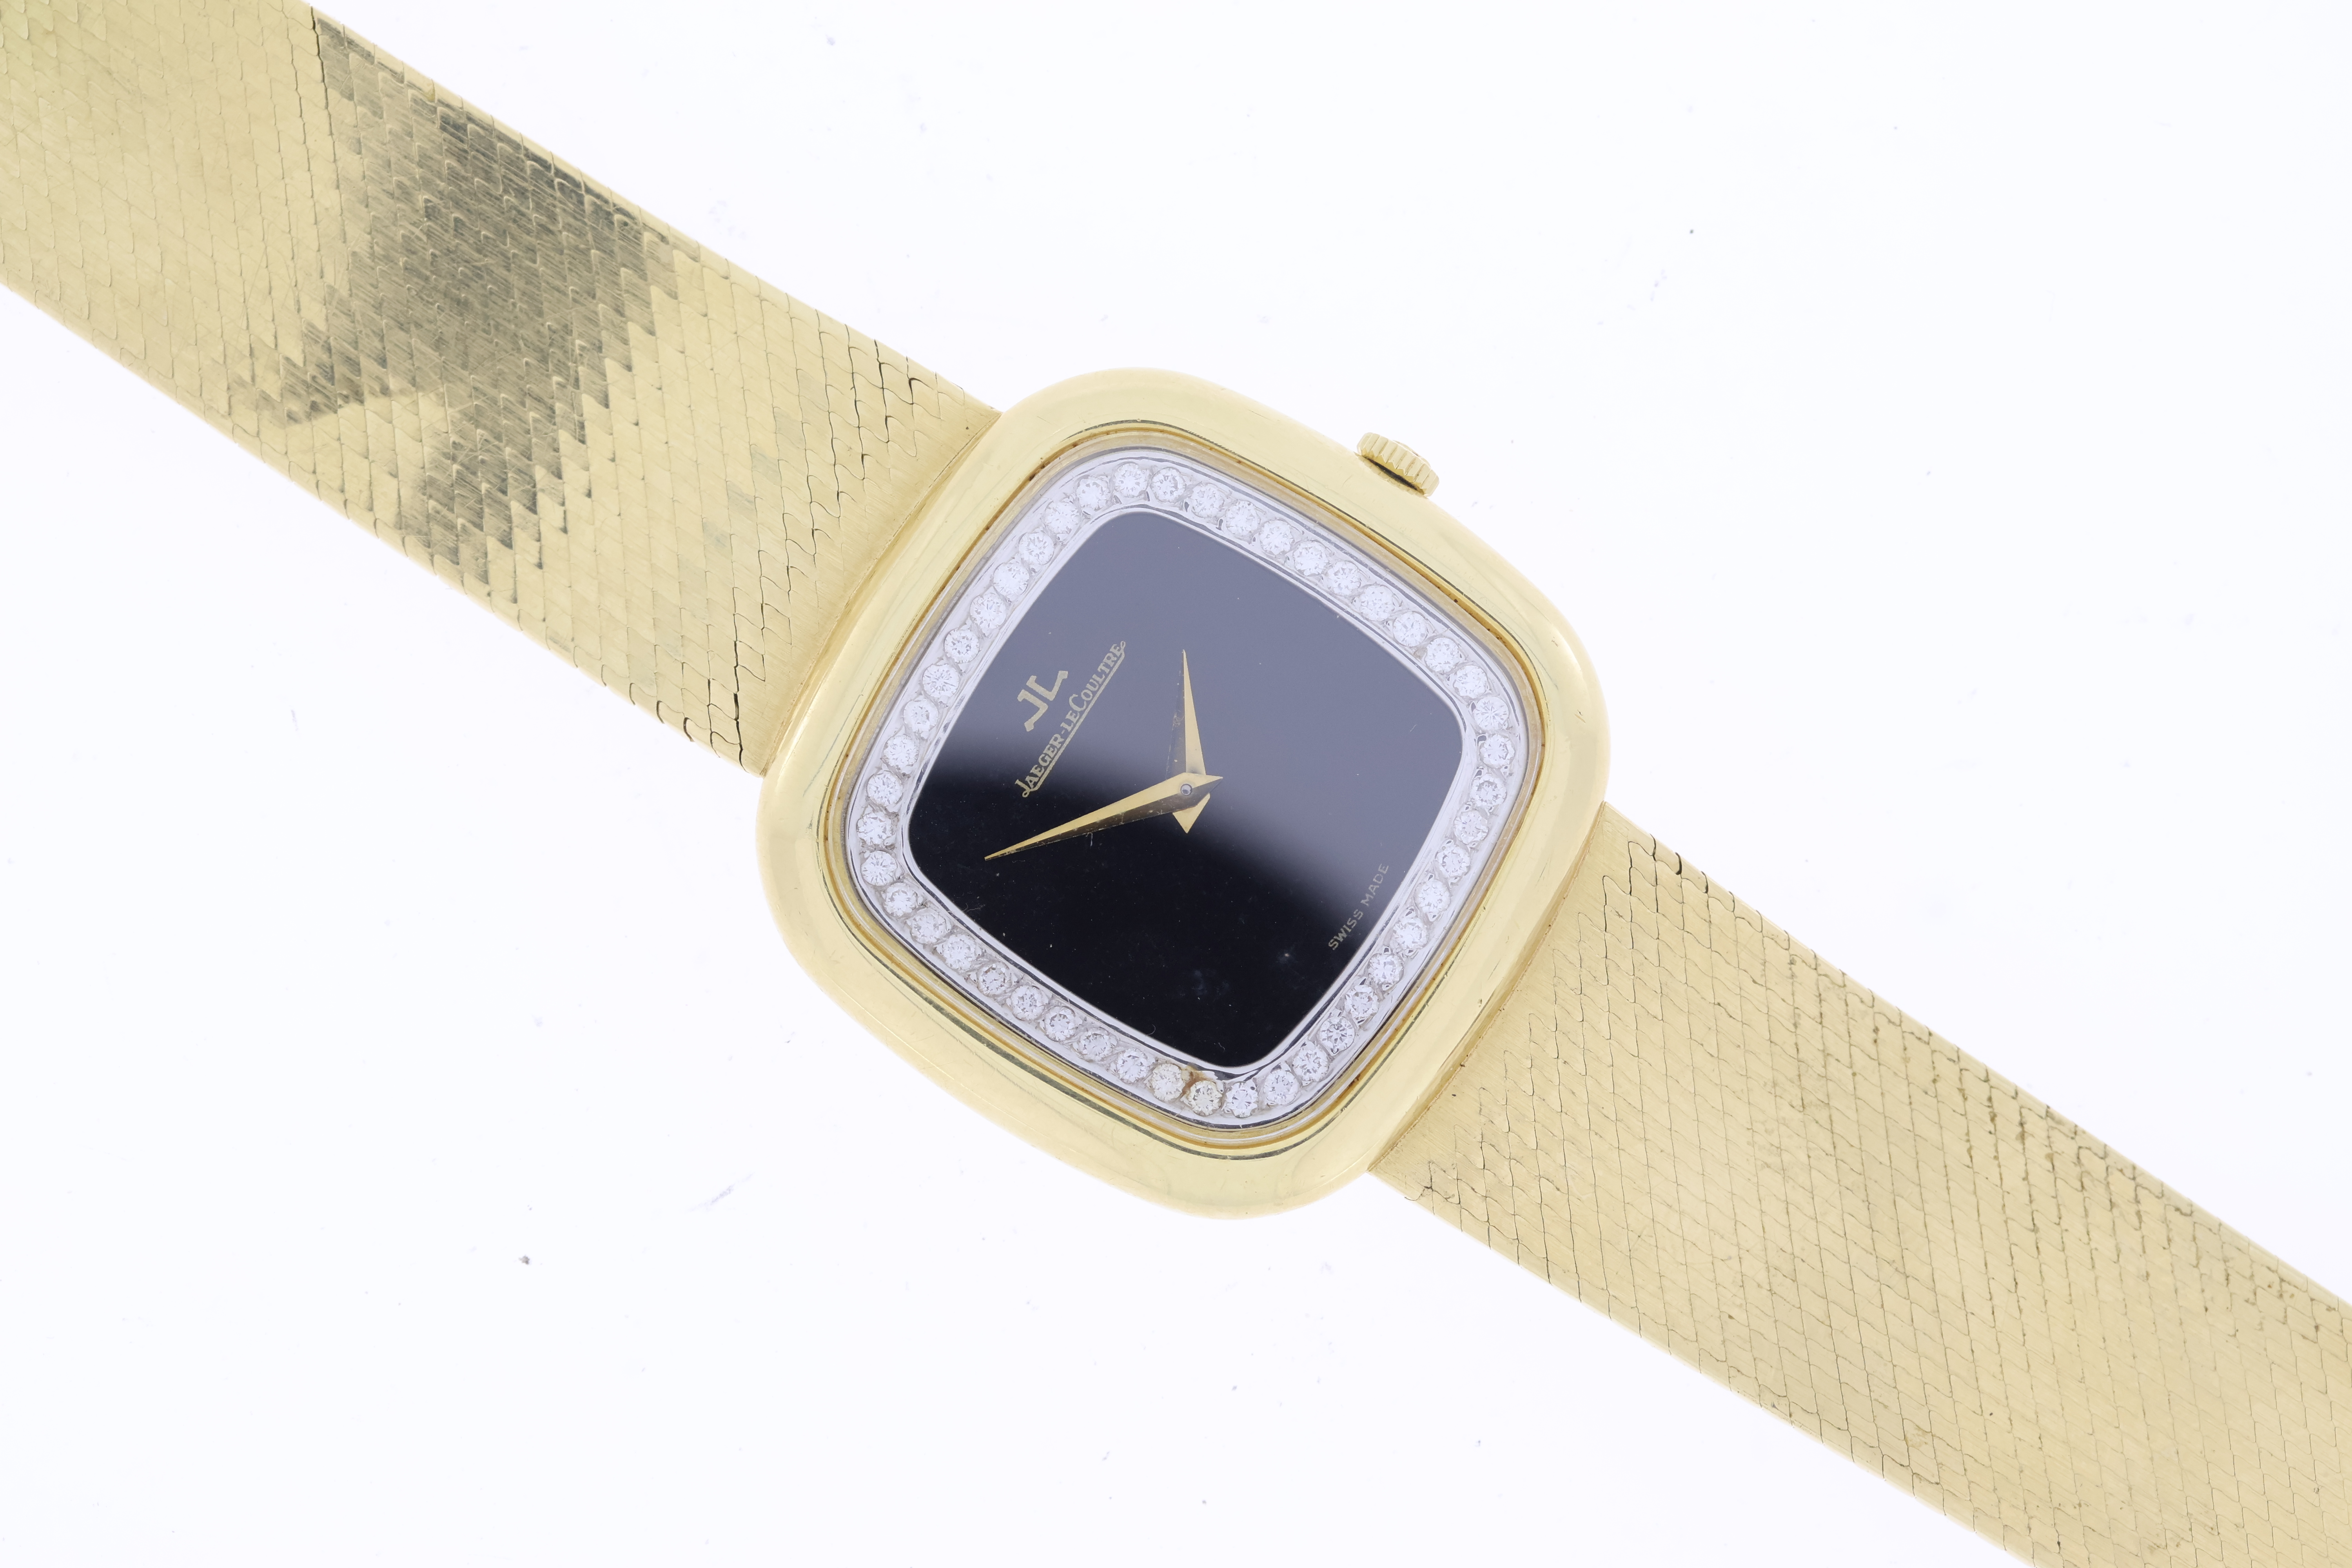 Jaeger Le Coultre Vintage 18ct Yellow Gold Manual wind